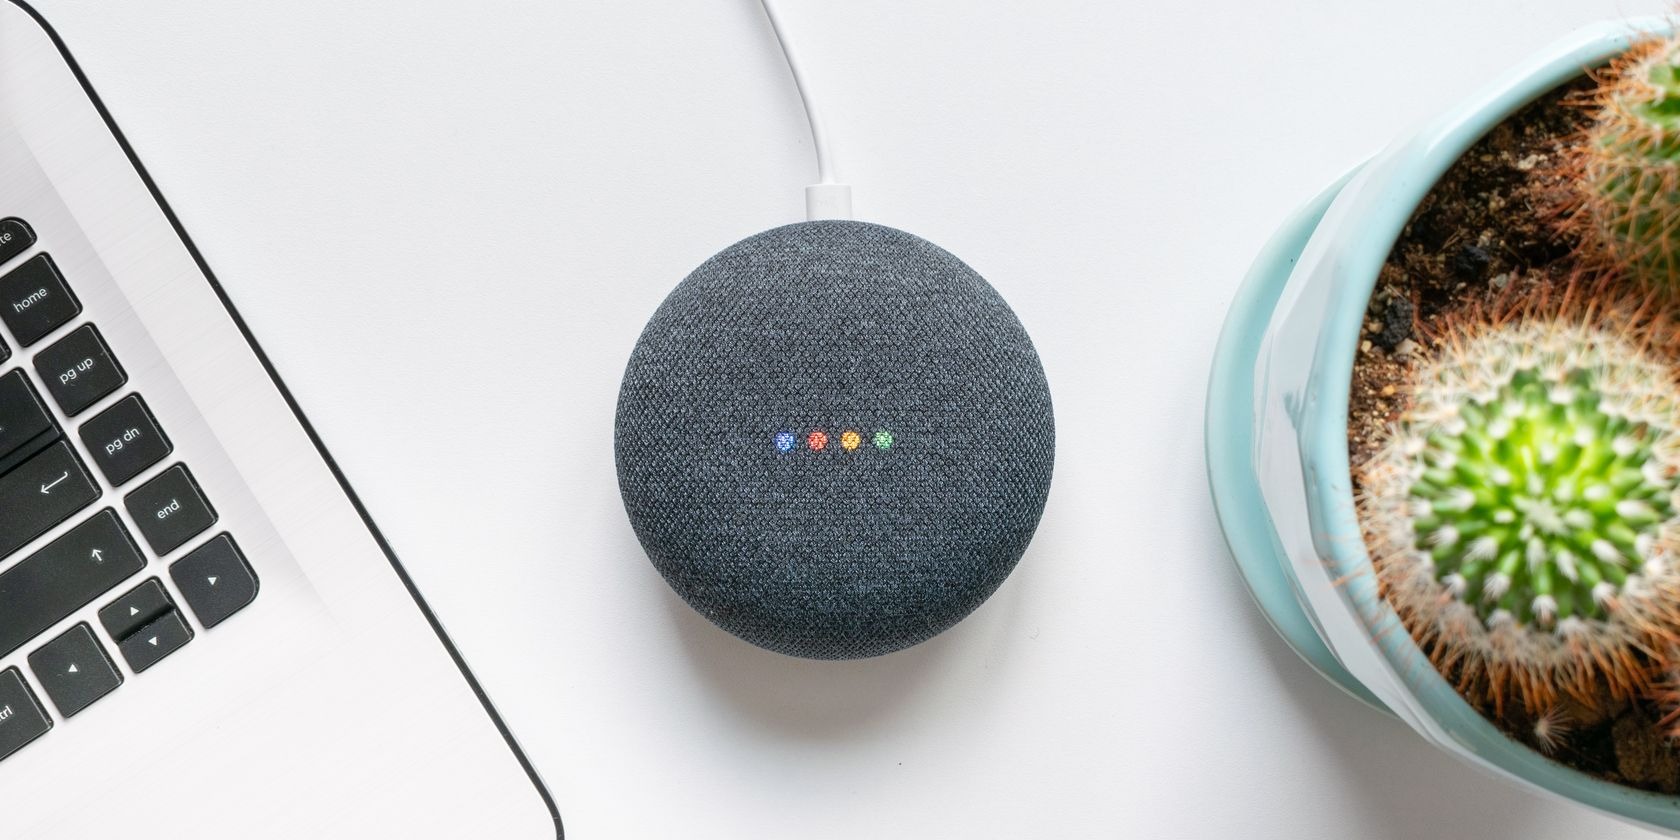 How To Connect Mac To Google Home